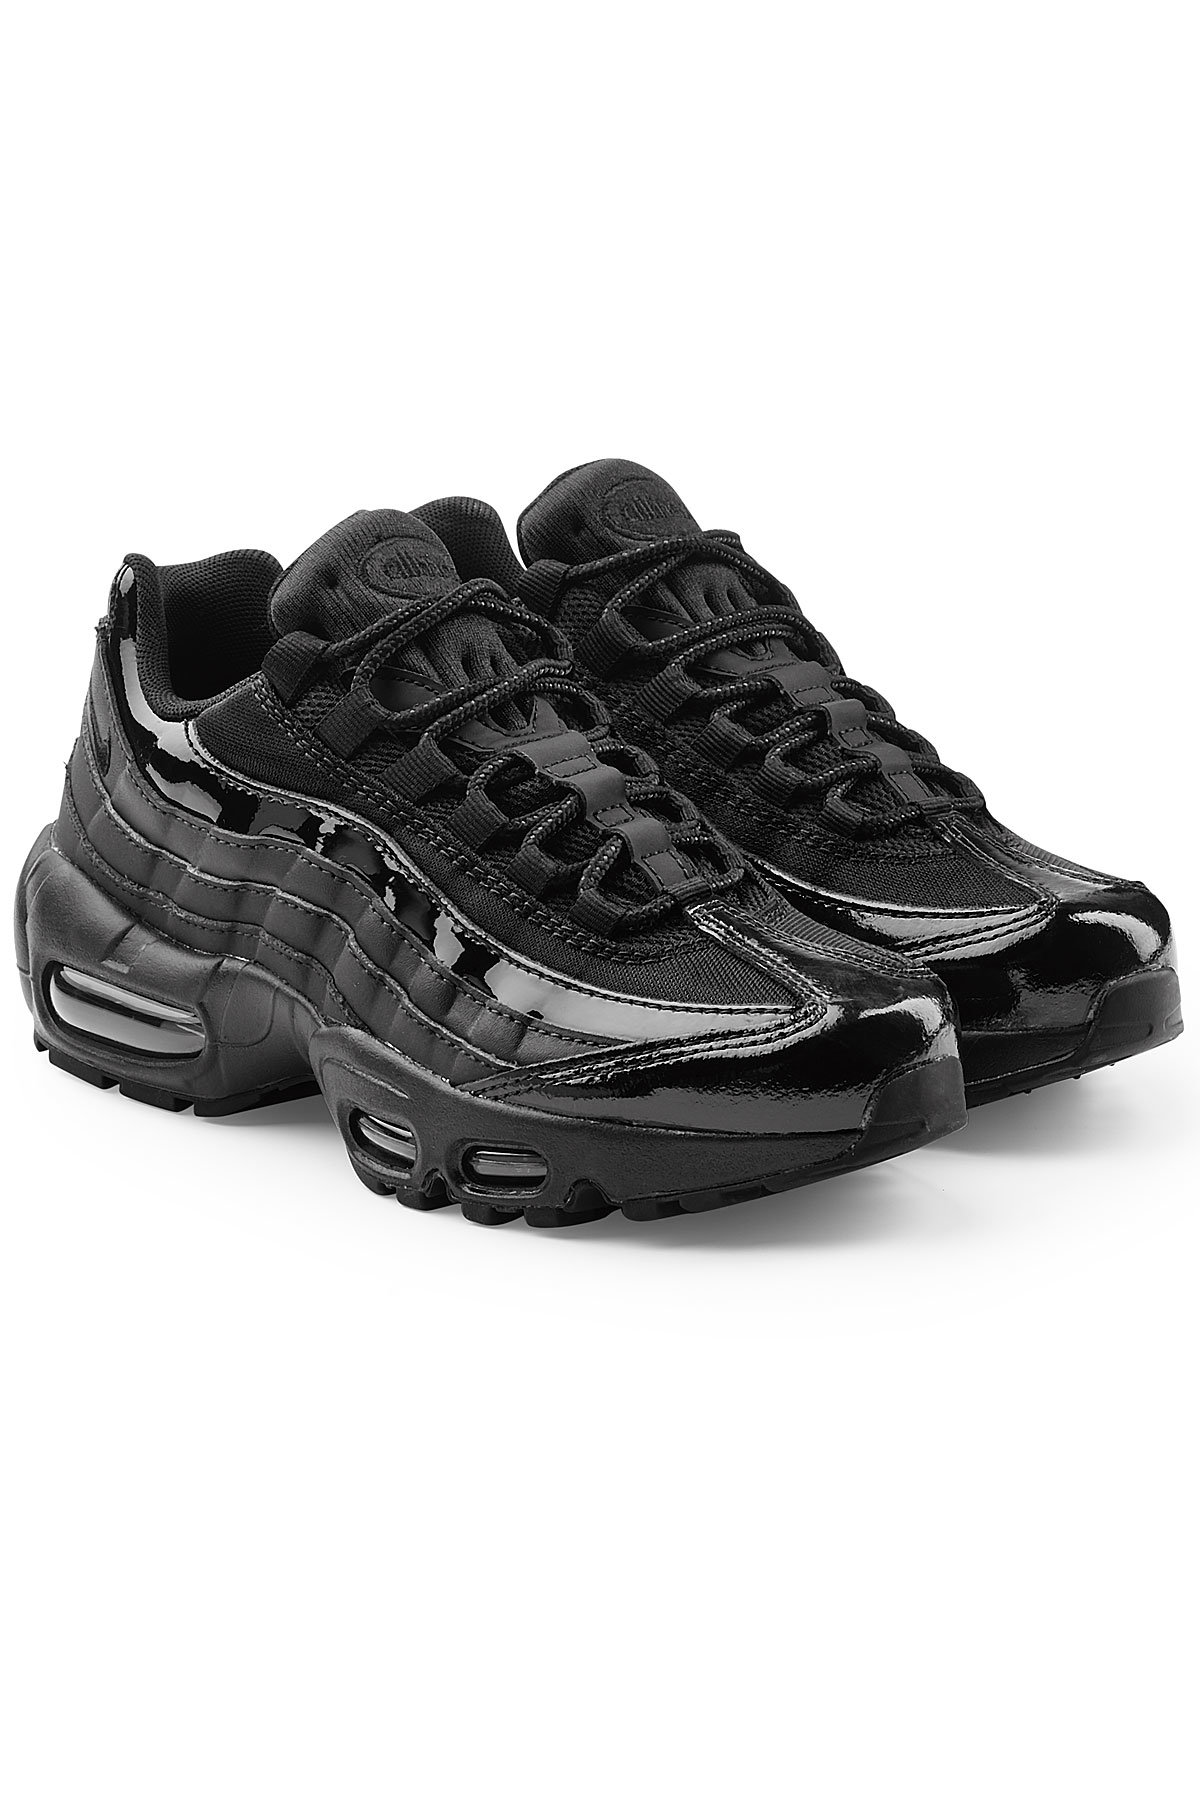 Nike - Air Max 95 Sneakers with Patent Leather